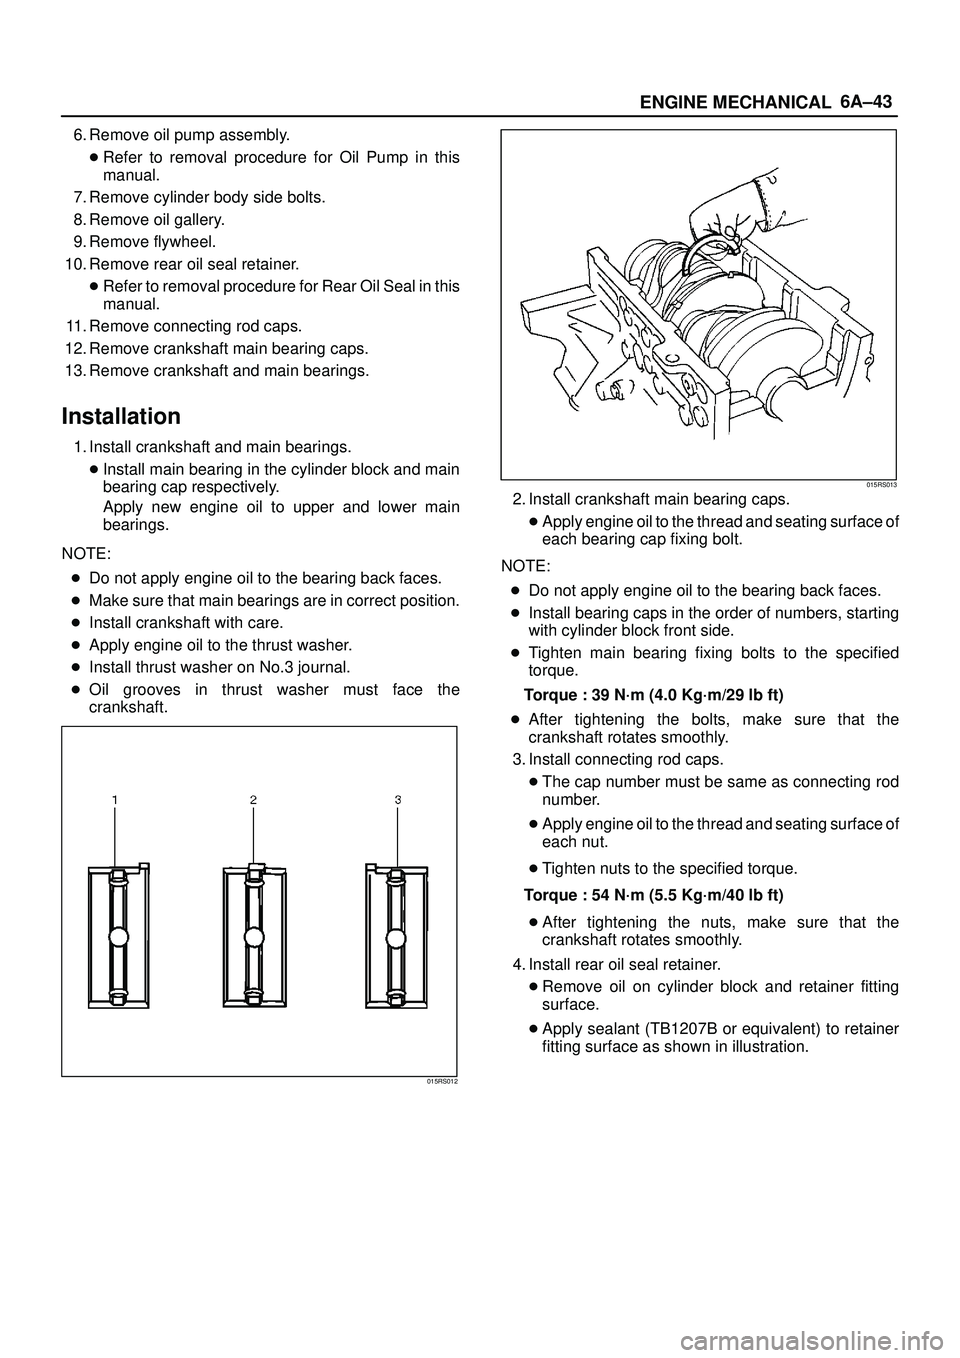 ISUZU TROOPER 1998  Service Owners Guide 6A±43
ENGINE MECHANICAL
6. Remove oil pump assembly.
Refer to removal procedure for Oil Pump in this
manual.
7. Remove cylinder body side bolts.
8. Remove oil gallery.
9. Remove flywheel.
10. Remove